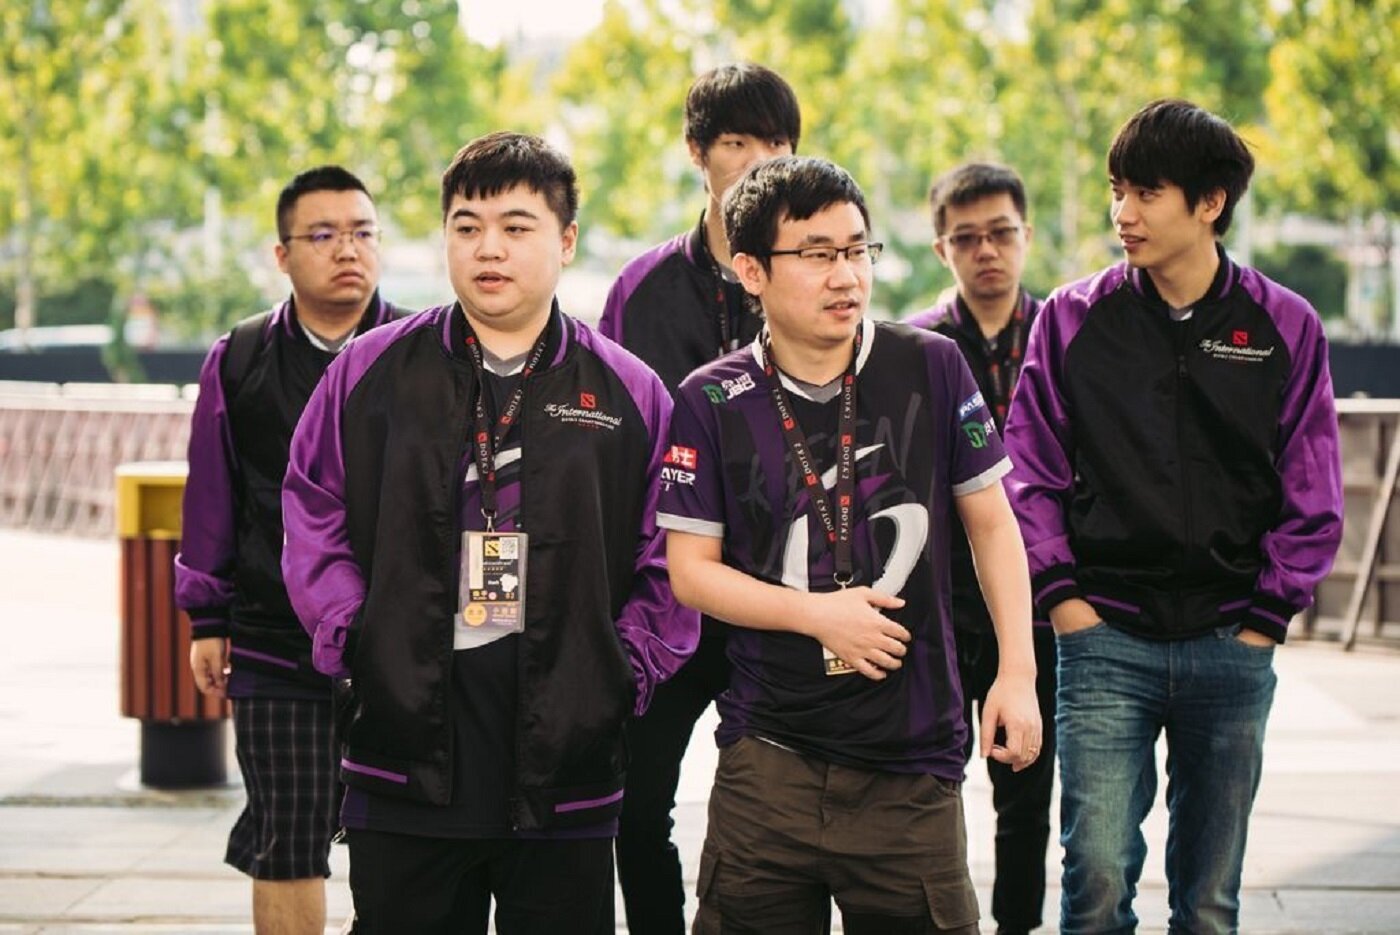 Keen Gaming are the first Chinese team eliminated from TI9. (Image via Valve)